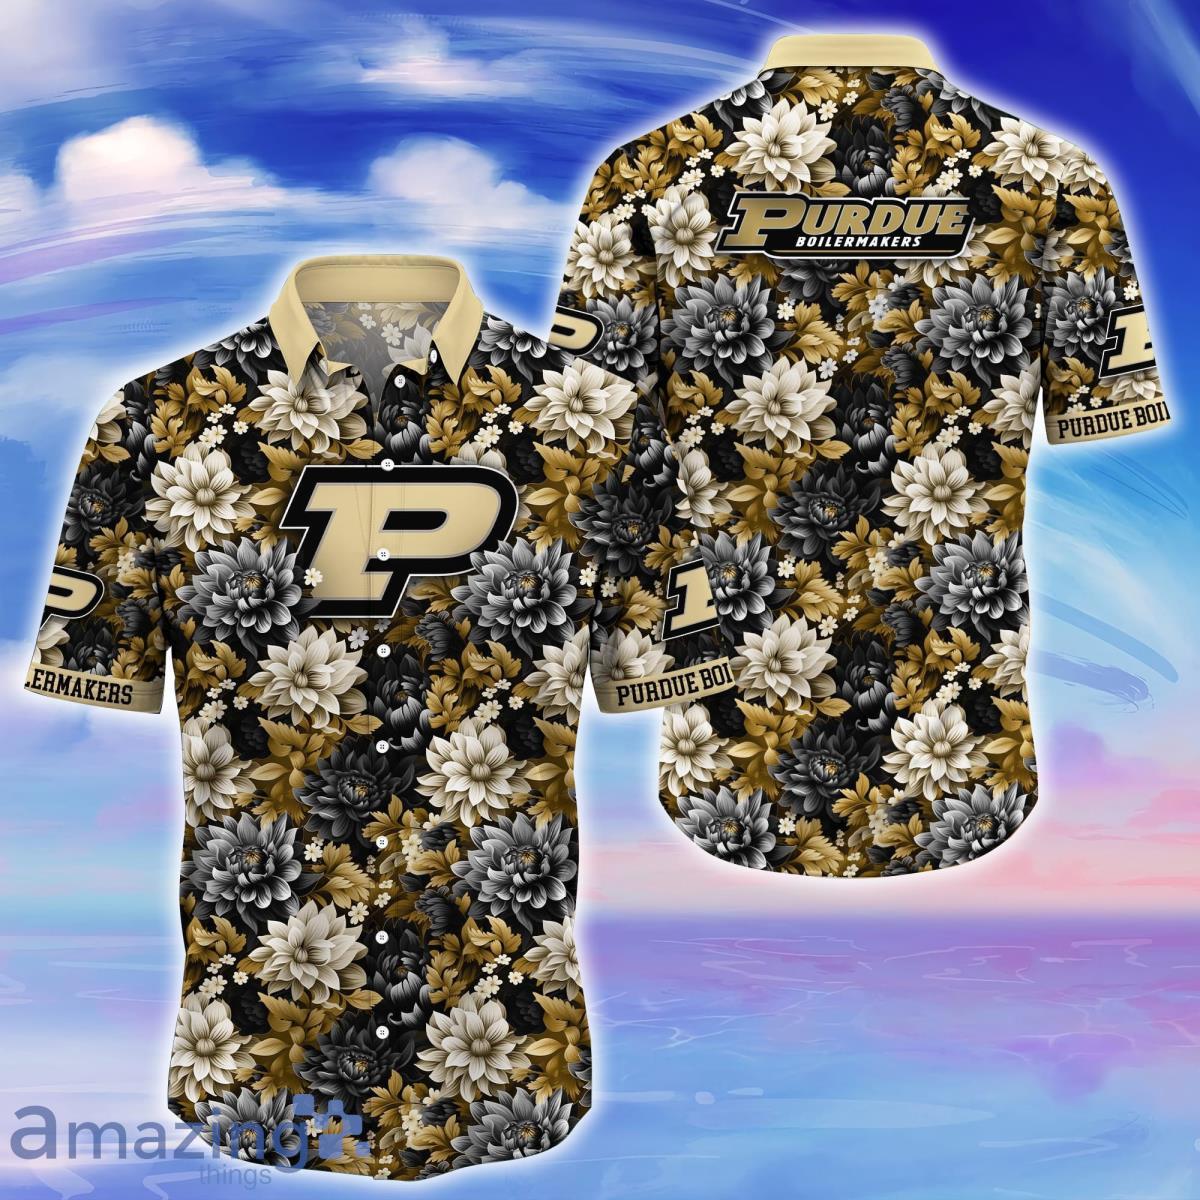 Purdue Boilermakers Trending Hawaiian Shirt Great Gift For Fans Product Photo 1